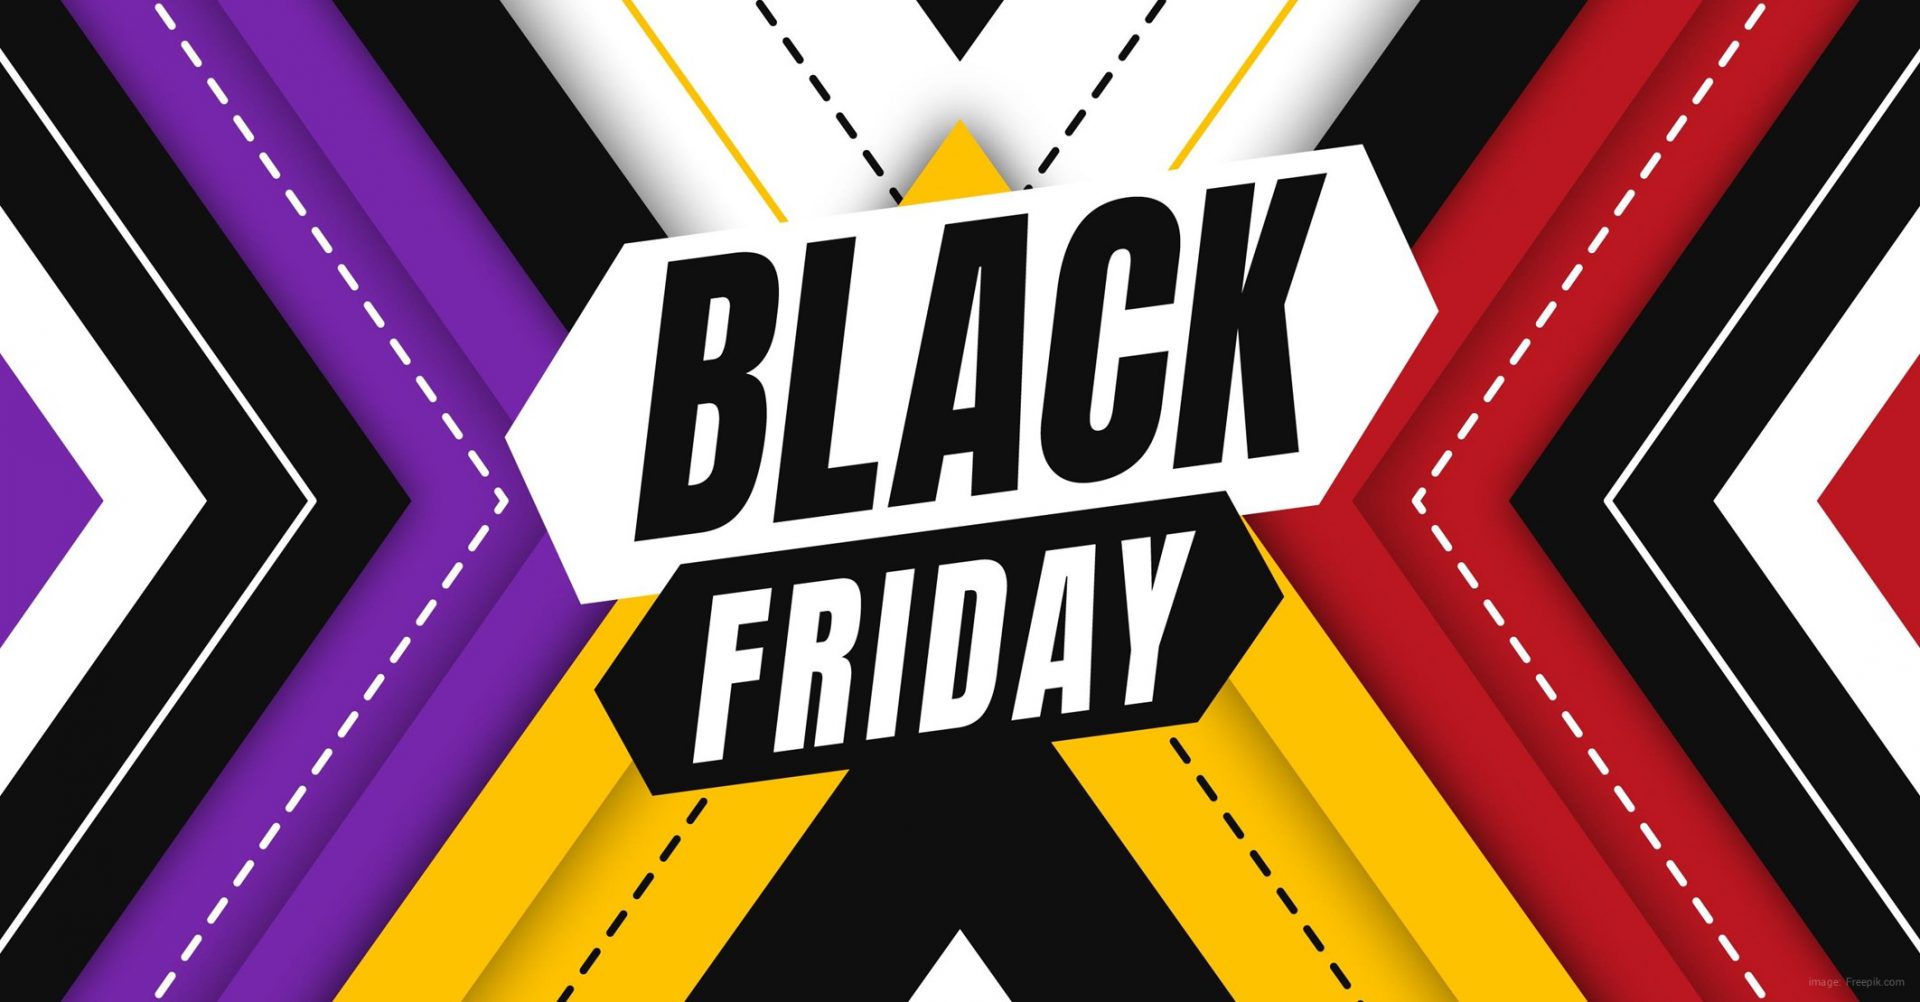 Add Some Colour To Your Black Friday With The Best Deals & Entertainment